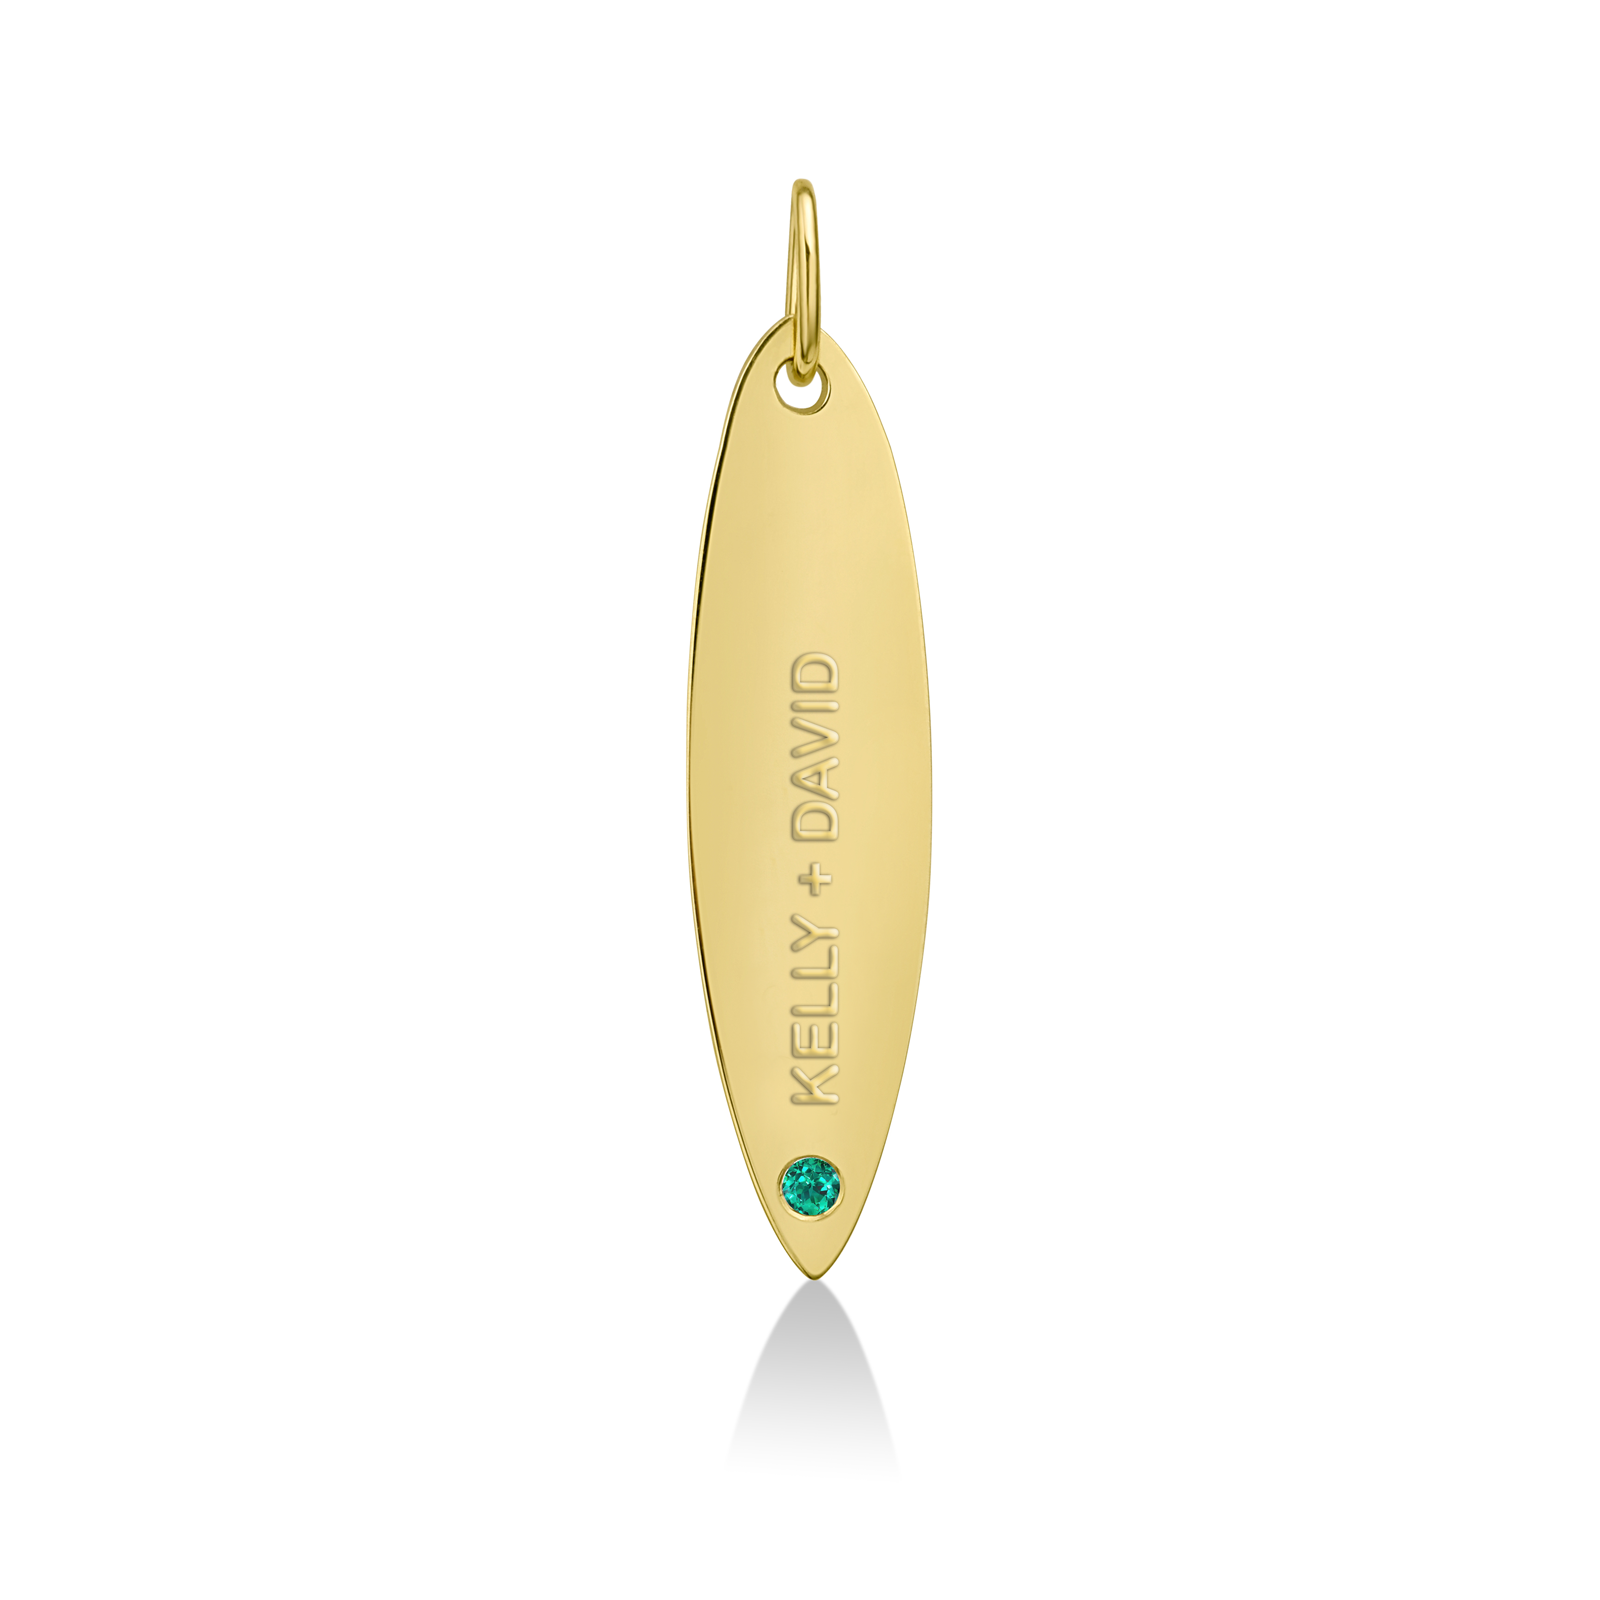 14k gold surfboard charm lock with KELLY + DAVID engraved and emerald